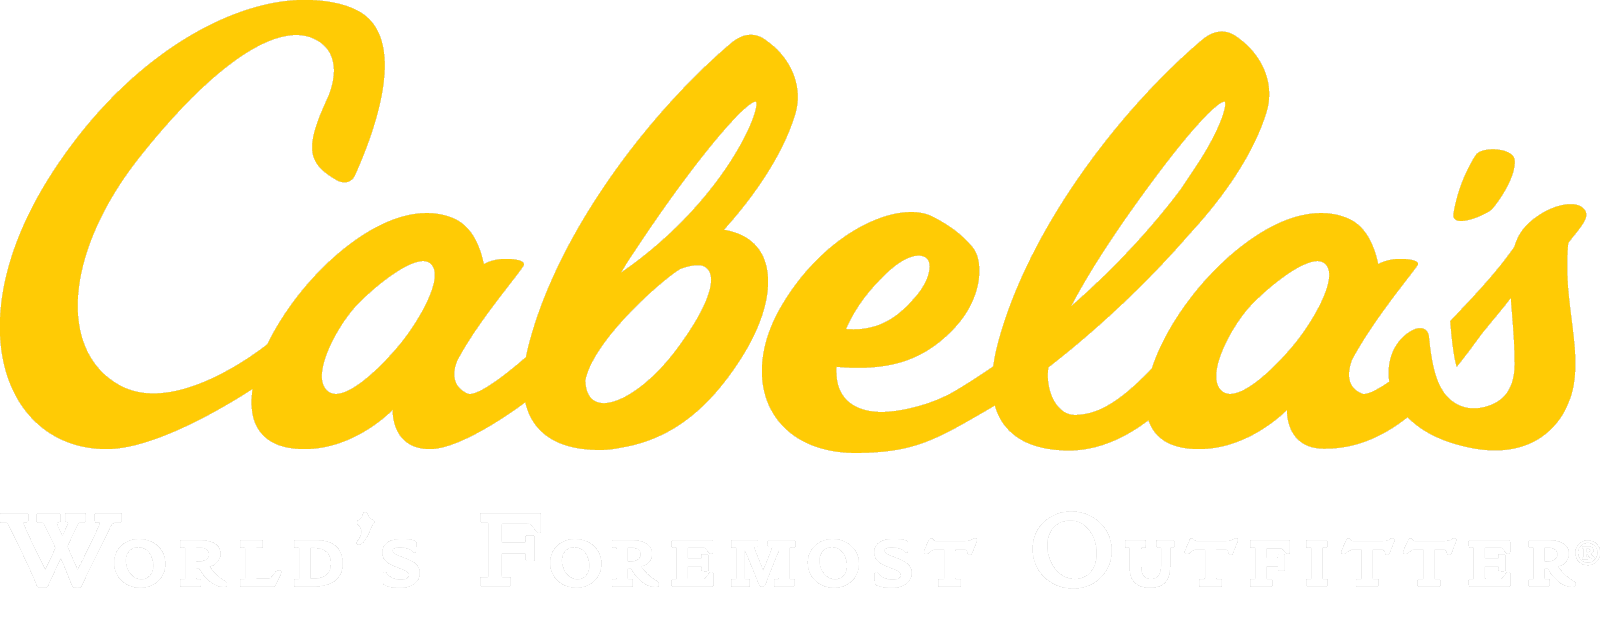 In Partnership with cabelas.com